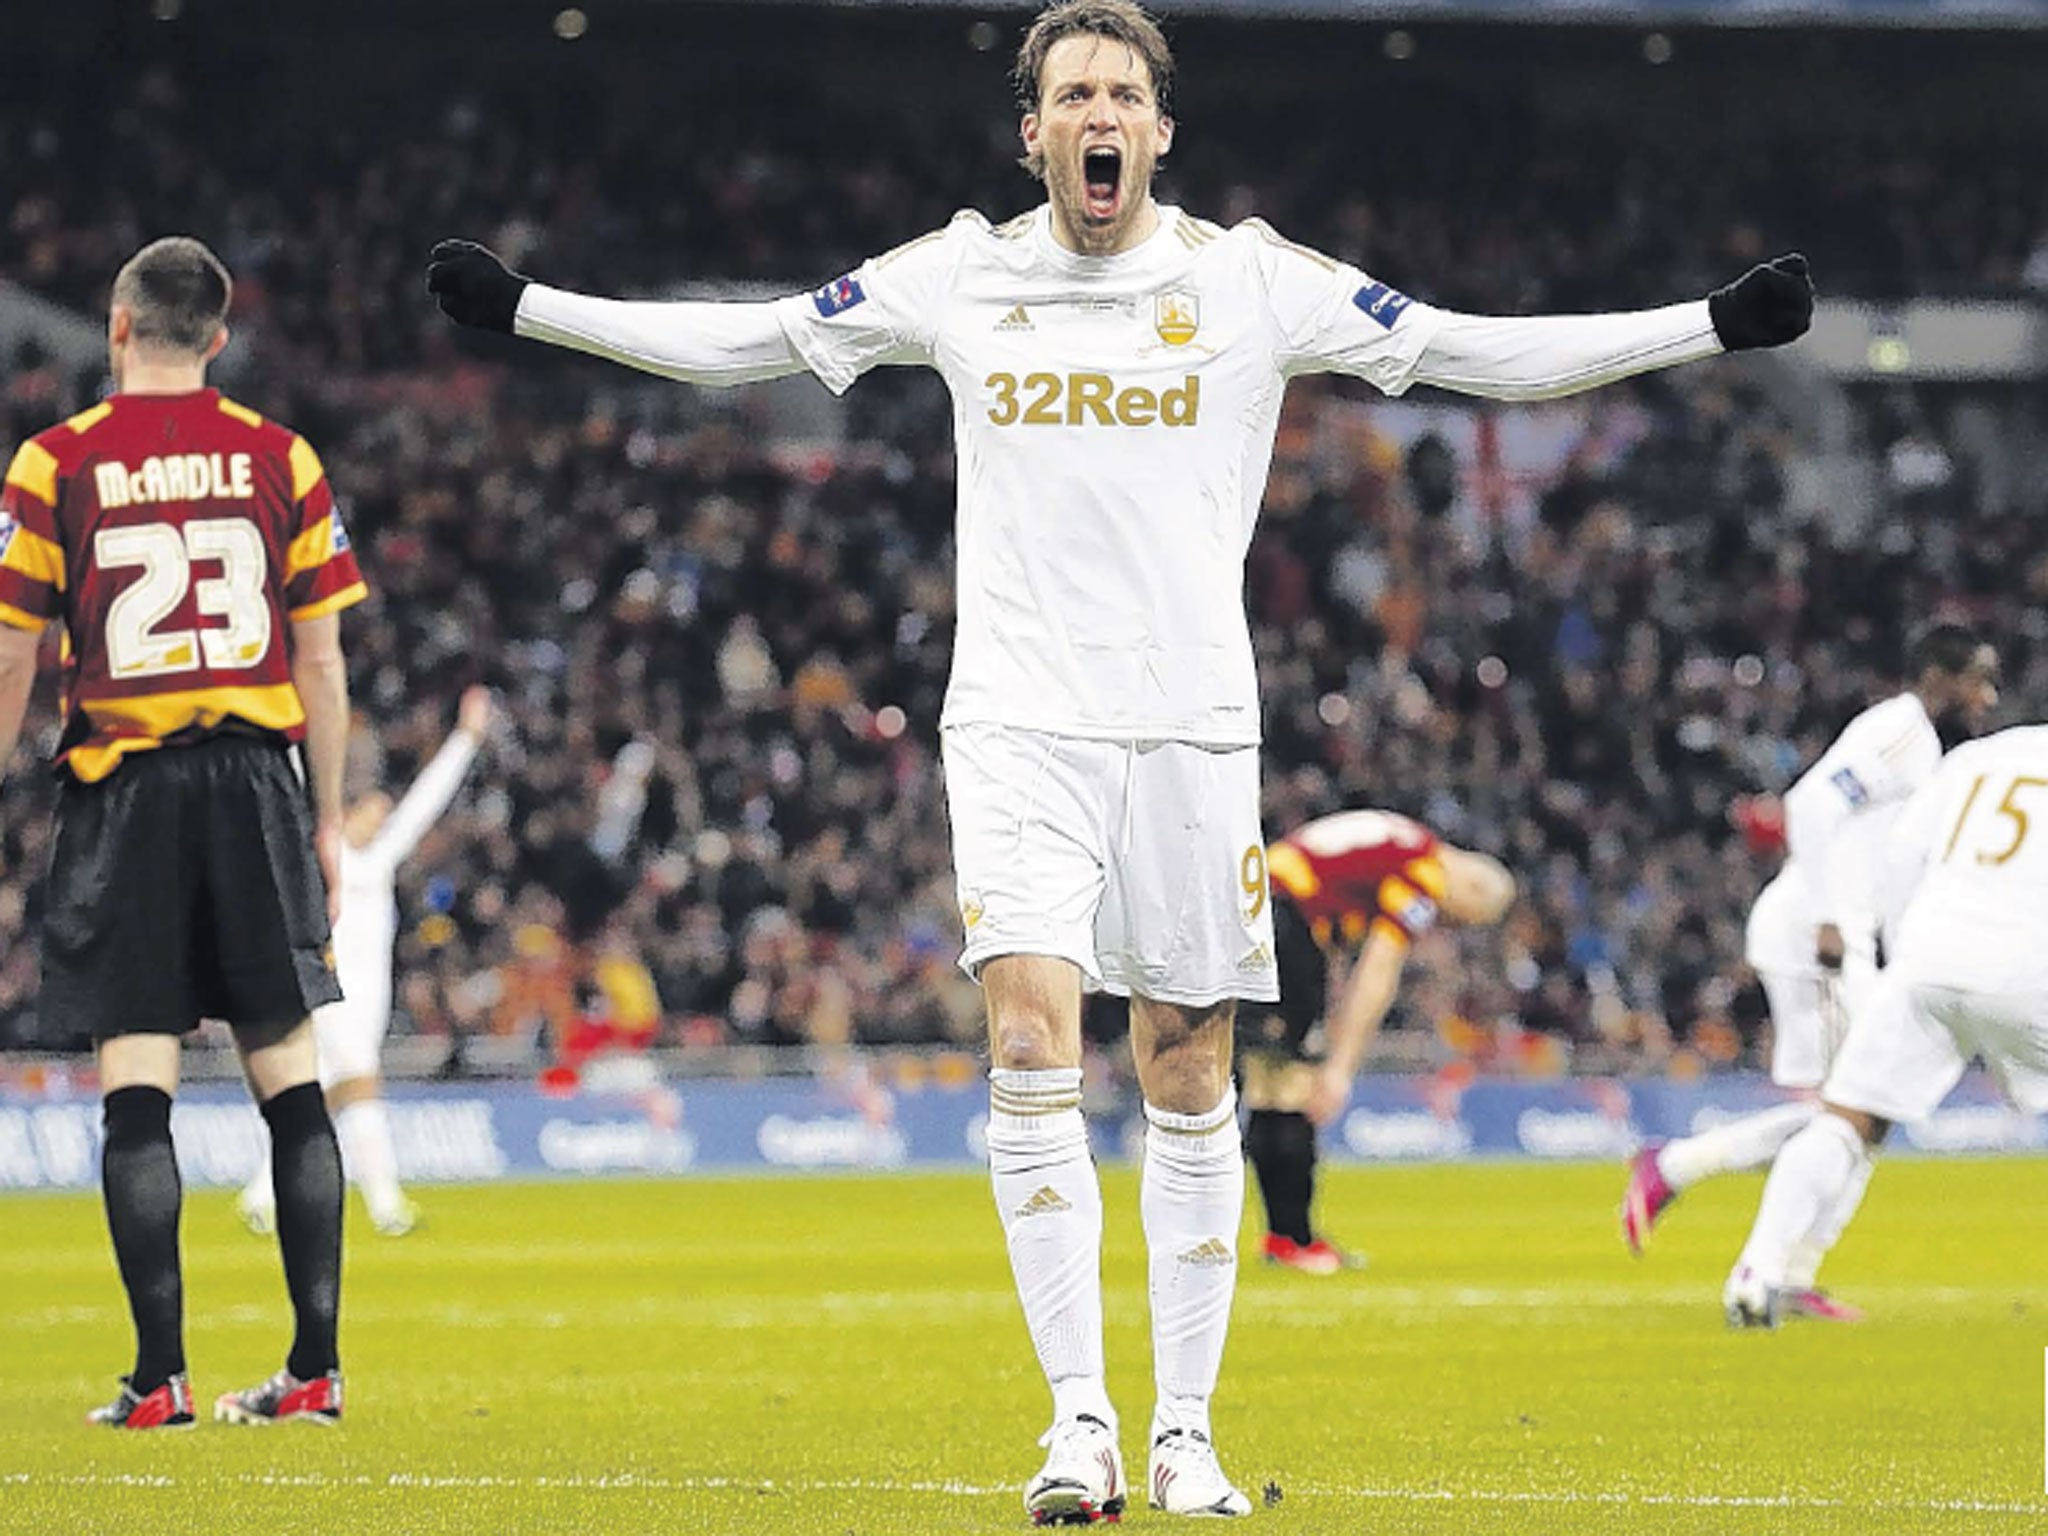 Swansea striker Michu celebrates after Nathan Dyer’s second
goal at Wembley